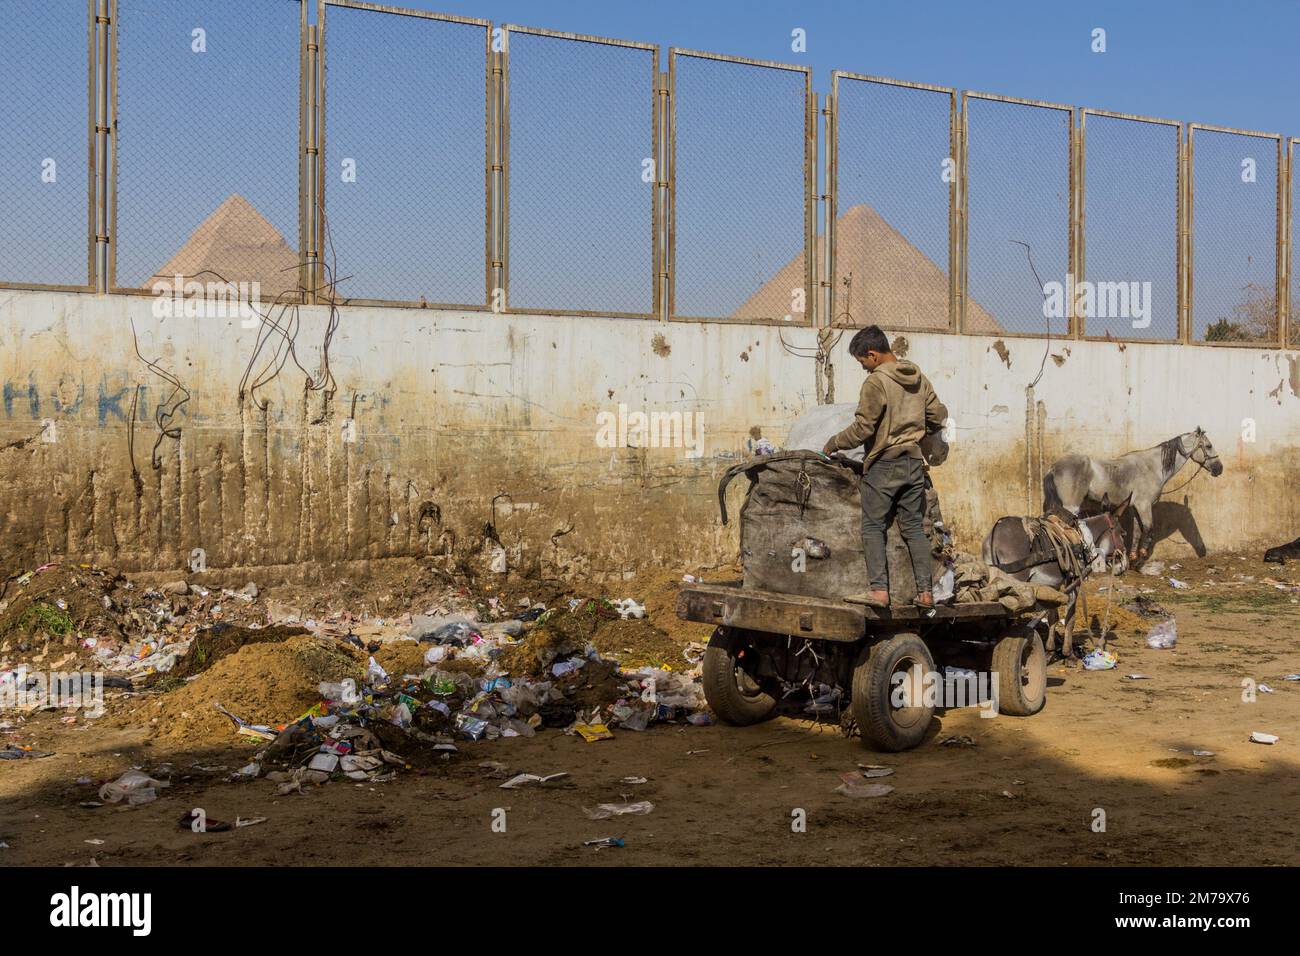 CAIRO, EGYPT - JANUARY 31, 2019: Donkey carriage collecting rubbish in Giza neighborhood of Cairo, Egypt Stock Photo